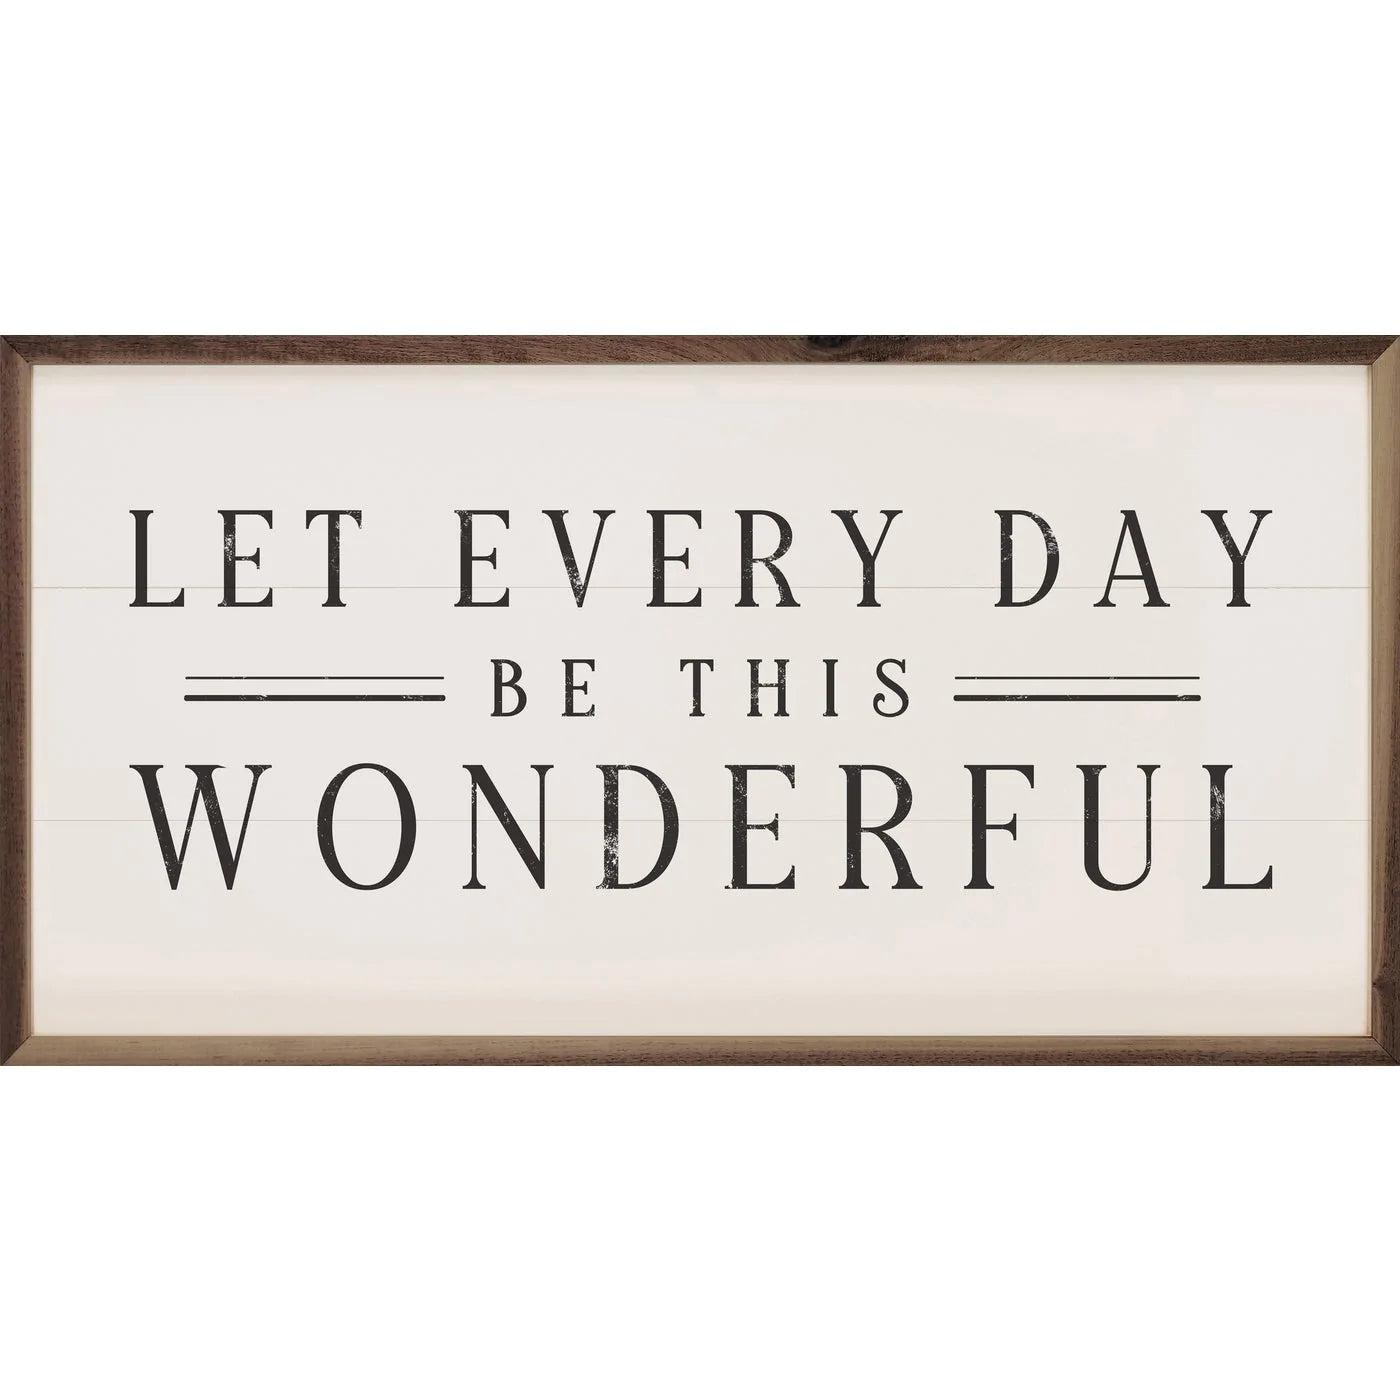 Let Every Day Be This Wonderful Wood Framed Print